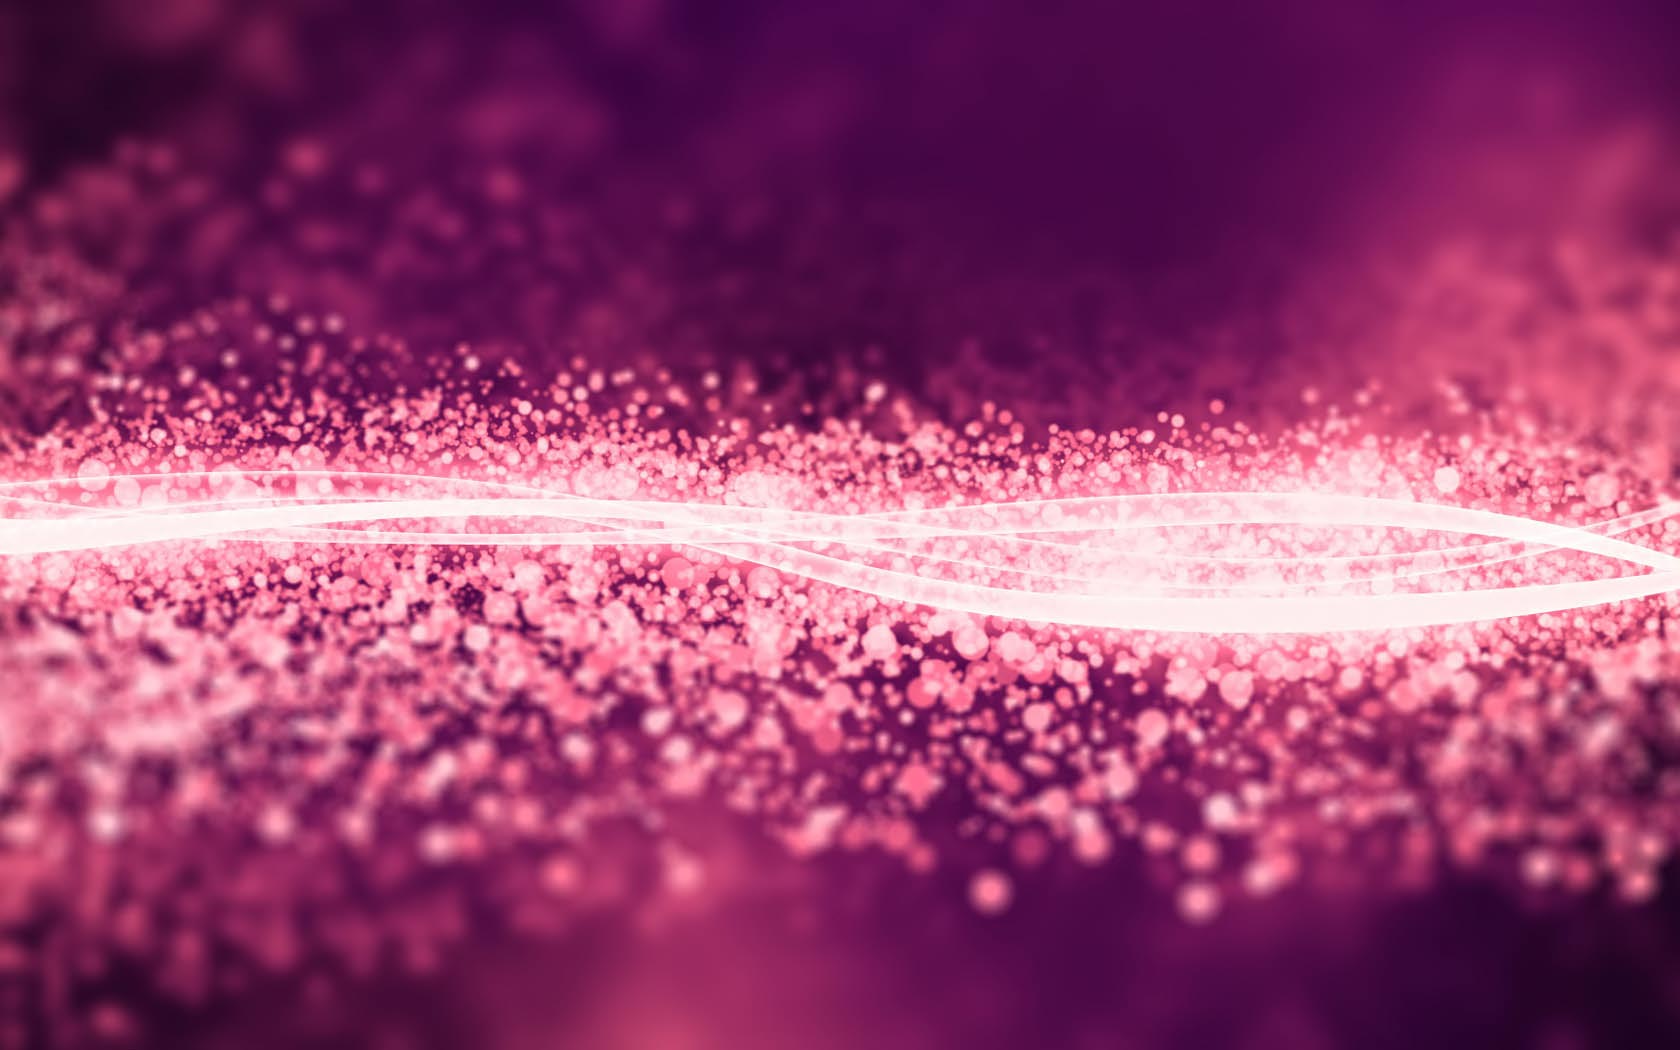 Pink Diamond Wallpaperpink Diamond Live Wallpaper For - Backgrounds 2048 Pixels Wide And 1152 Pixels Tall - HD Wallpaper 